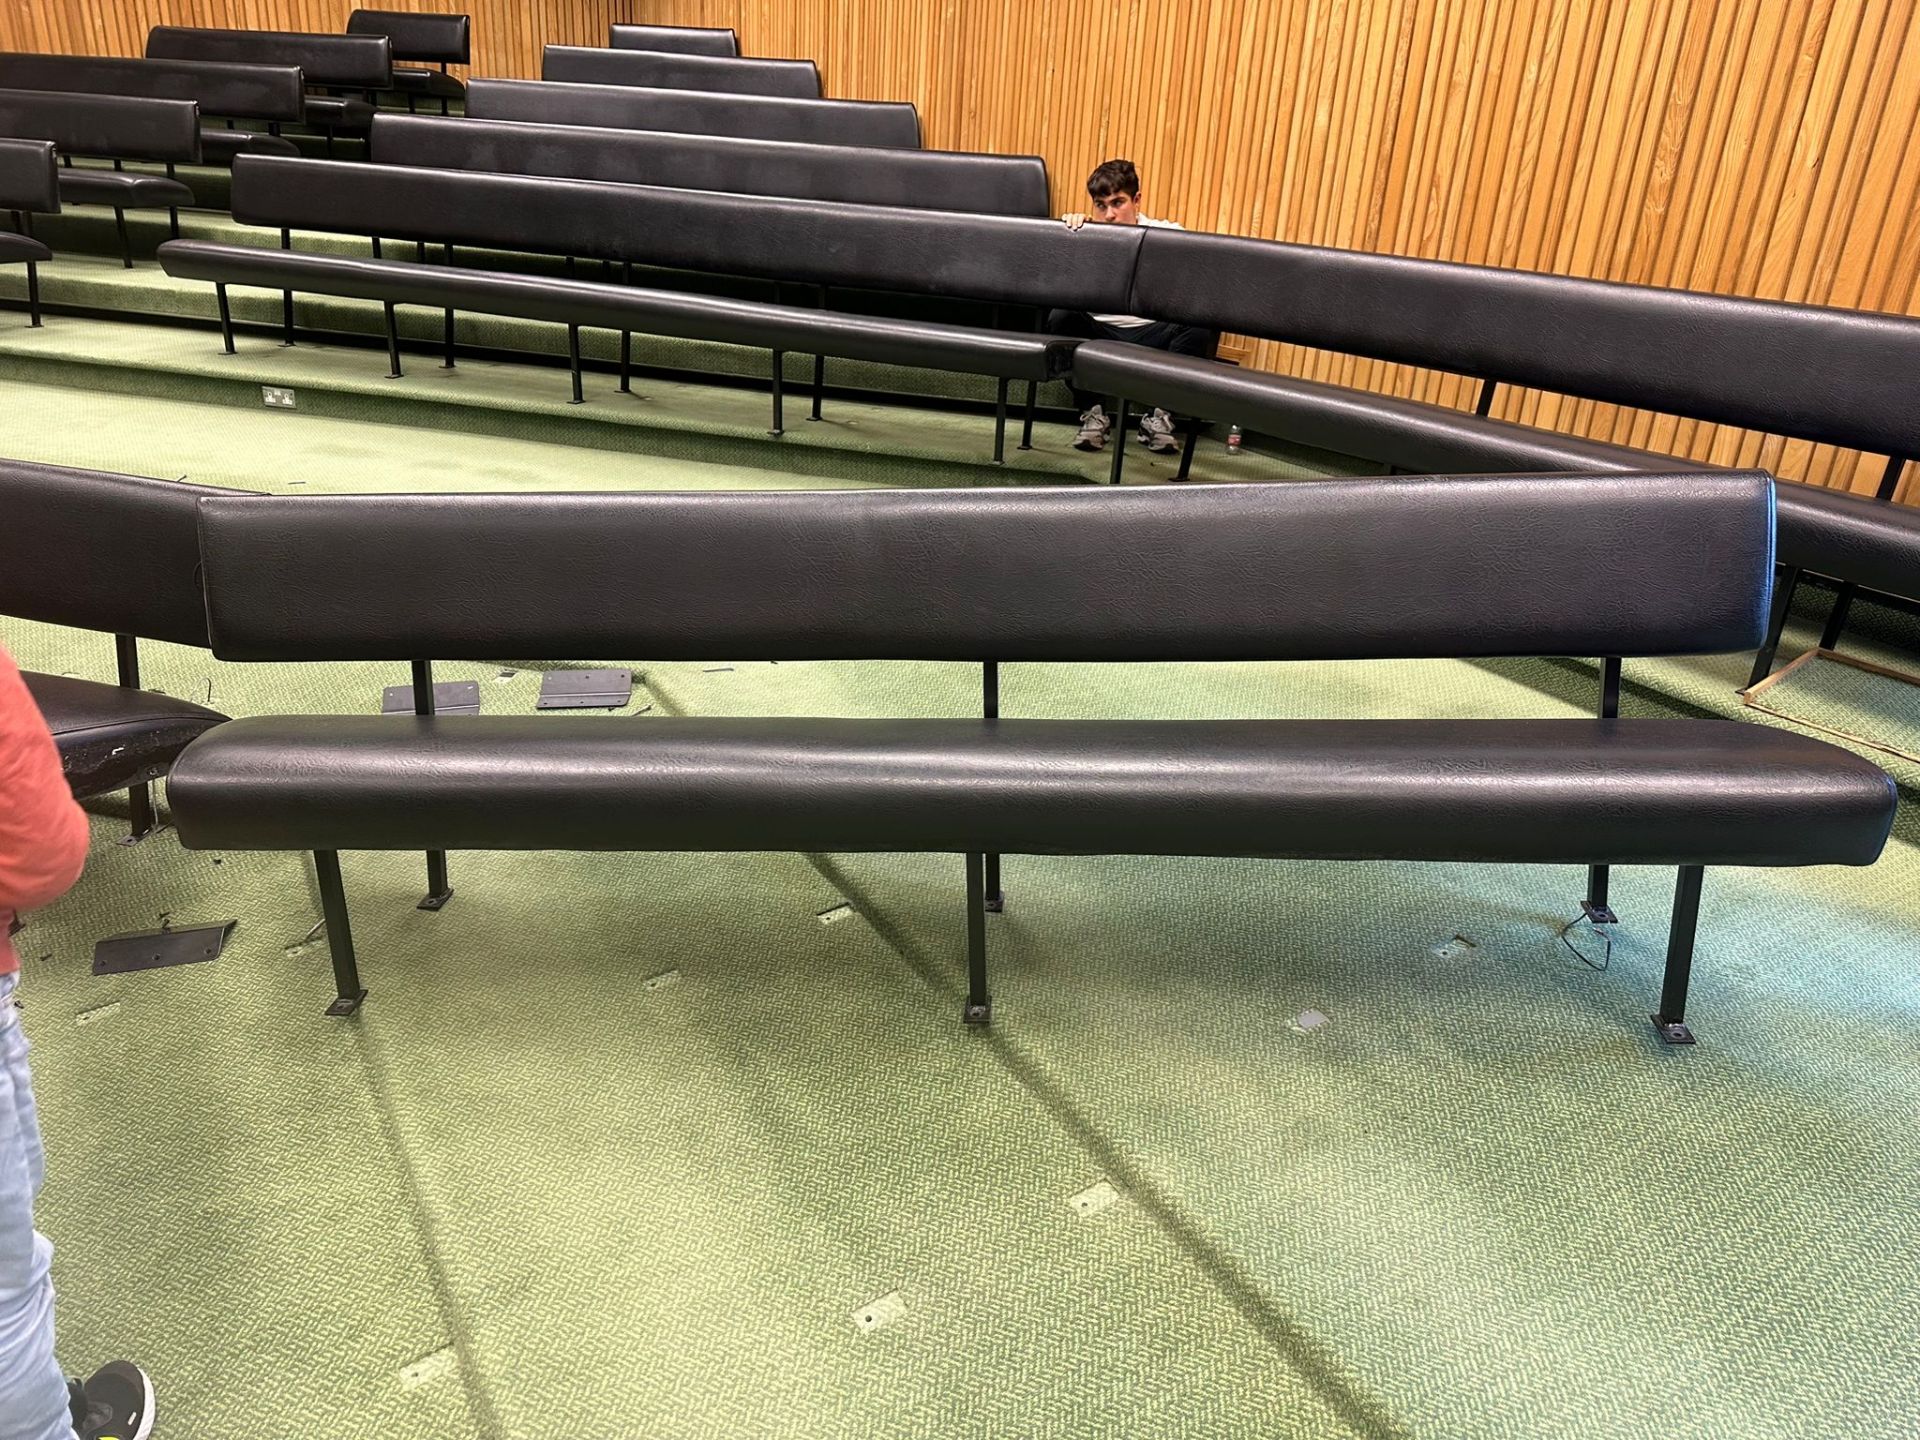 Conference Hall Seating Arrangement - Image 2 of 3